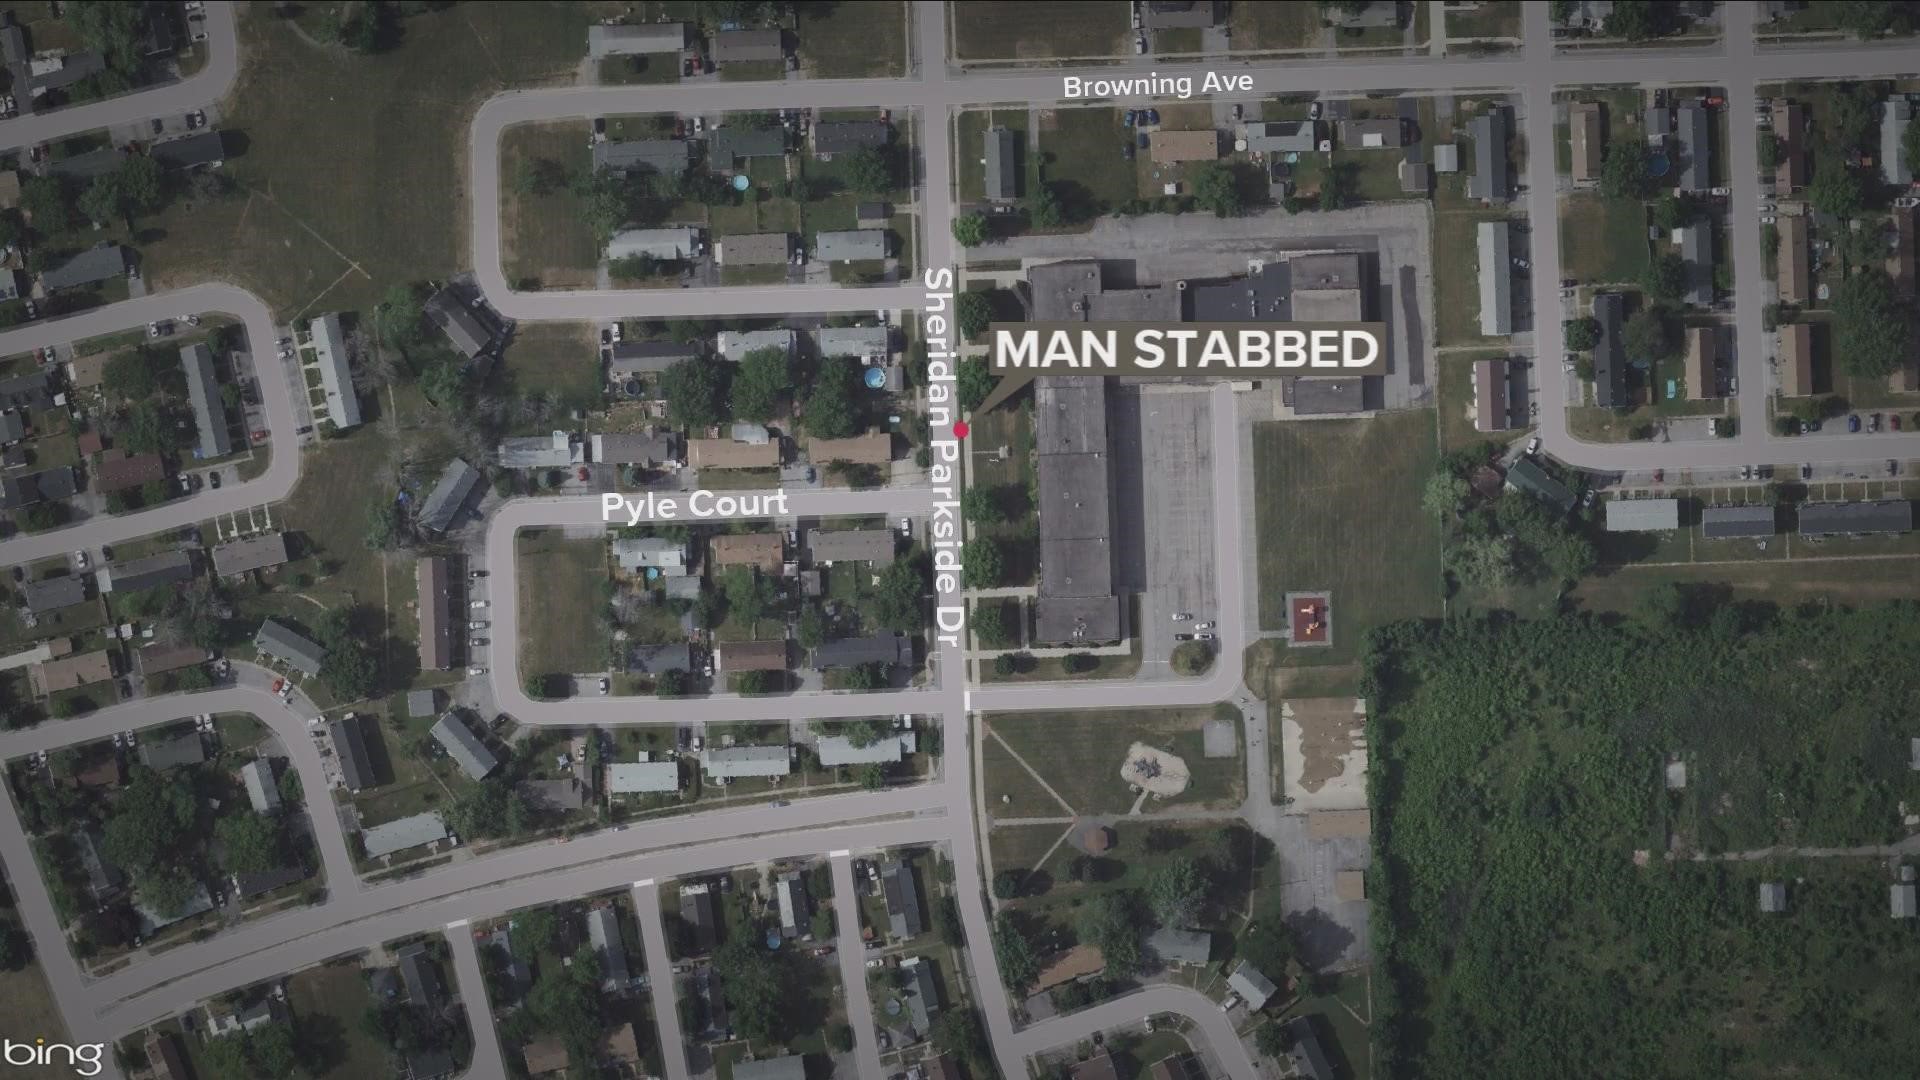 Police believe the victim was walking near Sheridan Parkside Drive and Pyle Court around 9:15 p.m. when he was attacked.